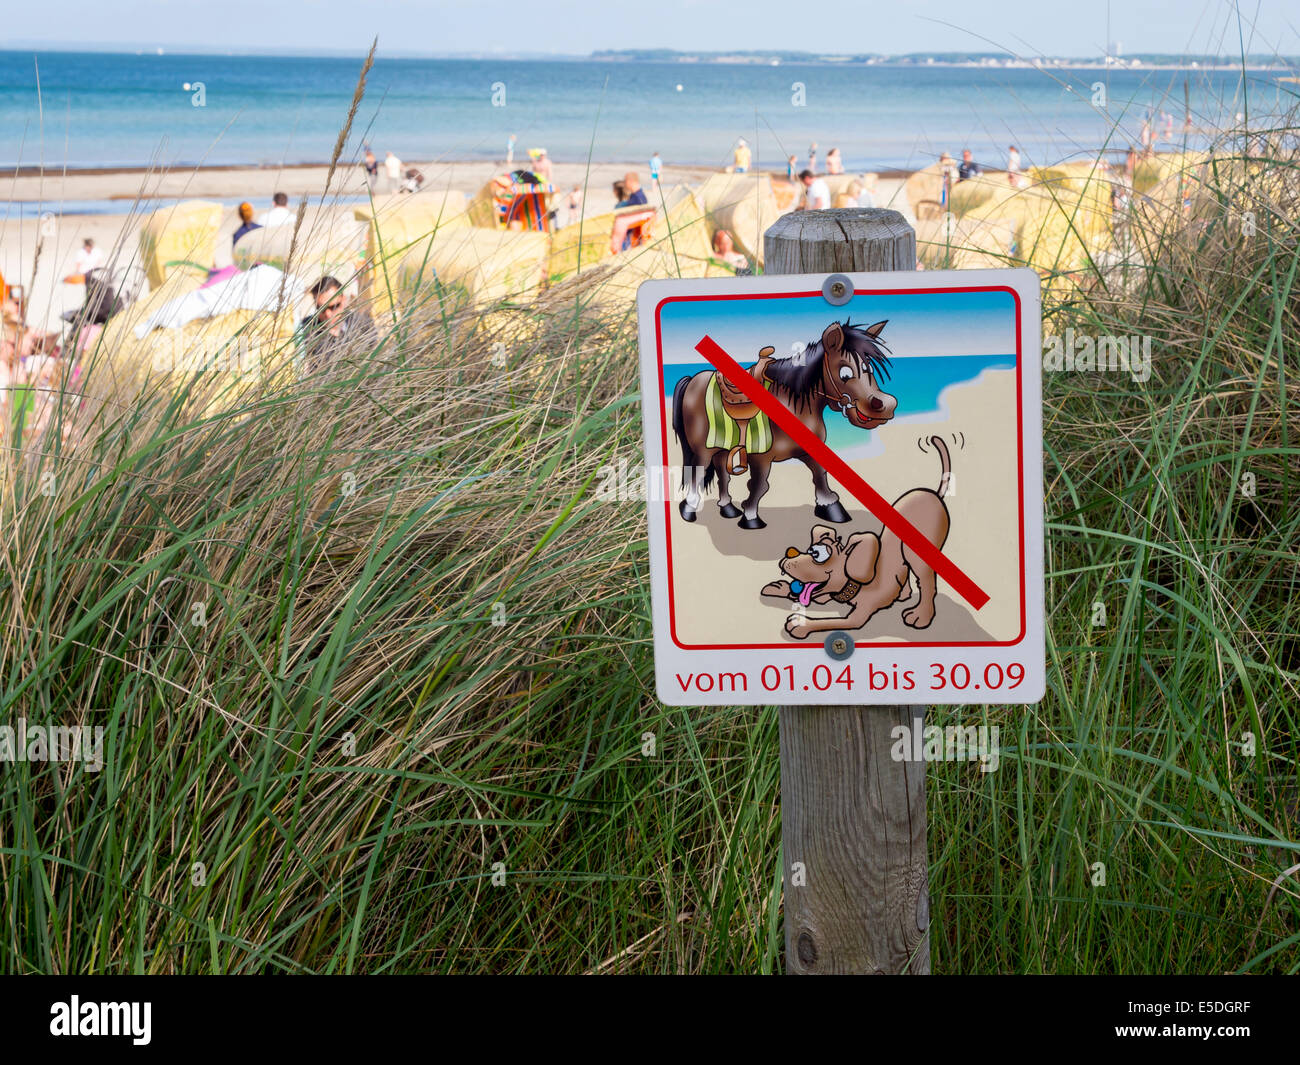 Germany, Schleswig-Holstein, Scharbeutz, no dogs and horses sign at beach Stock Photo